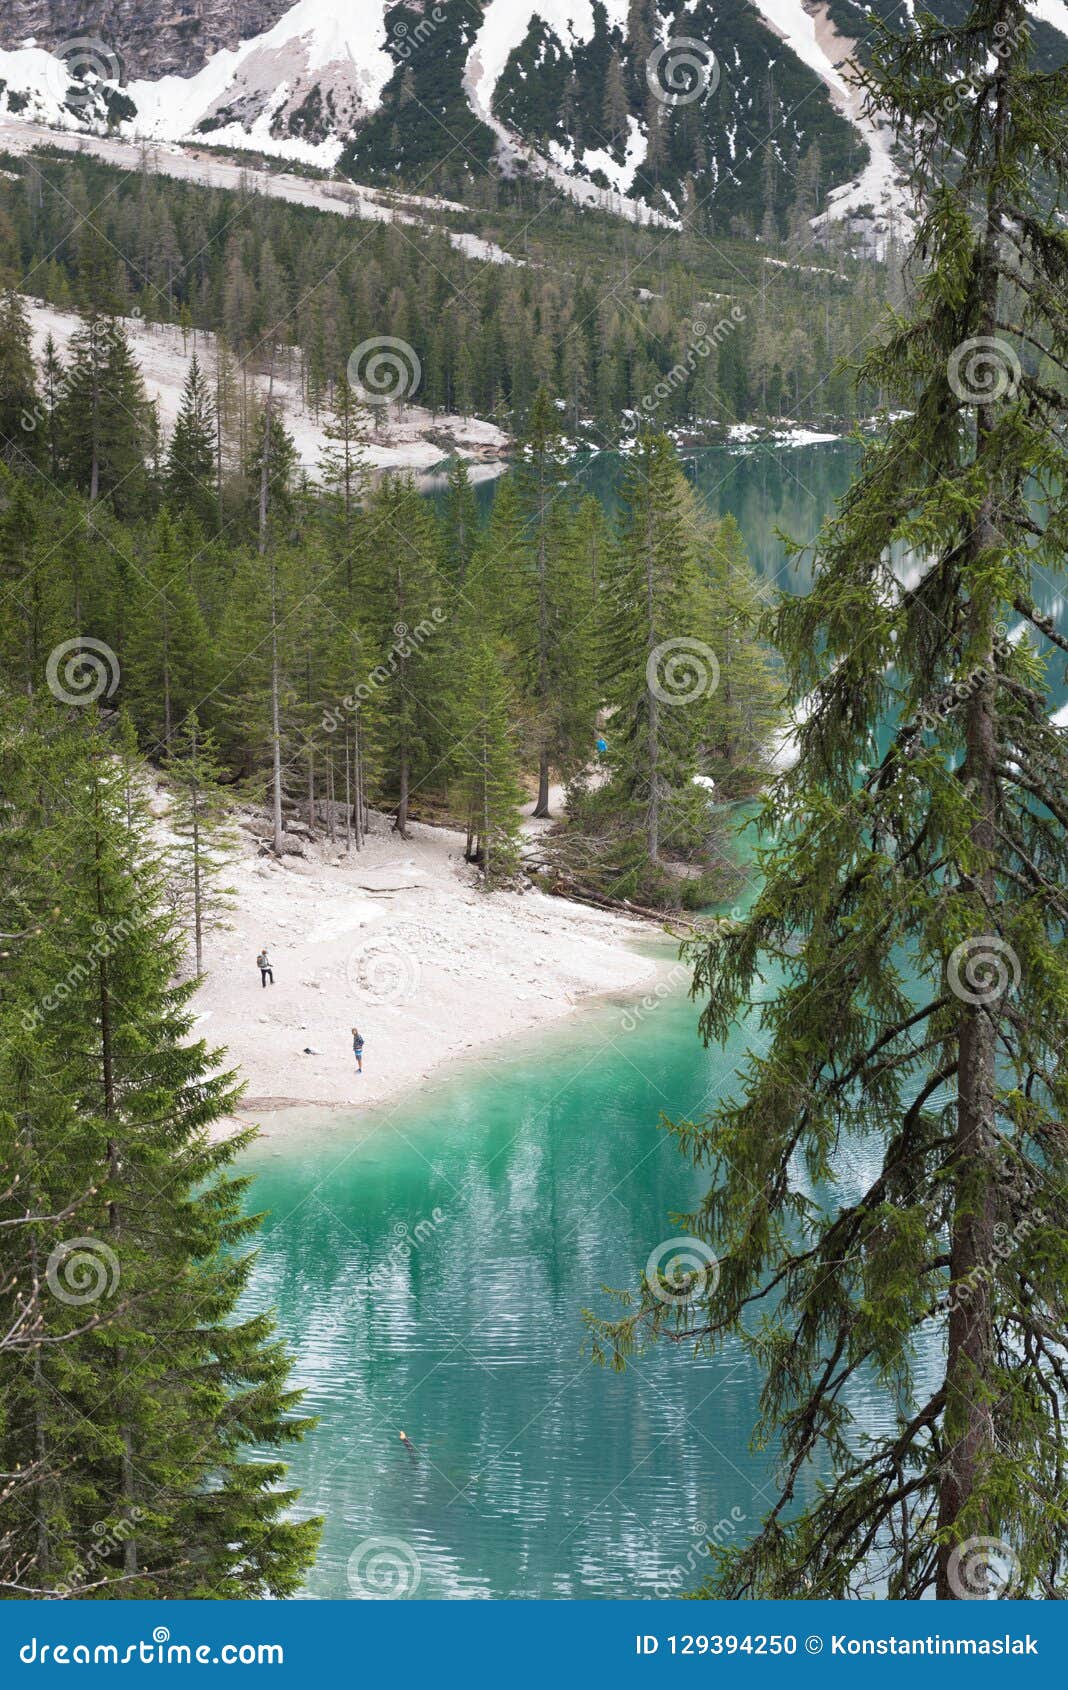 magnificent lake lago di braies. the emerald smooth surface of water reflects the wood and mountains around